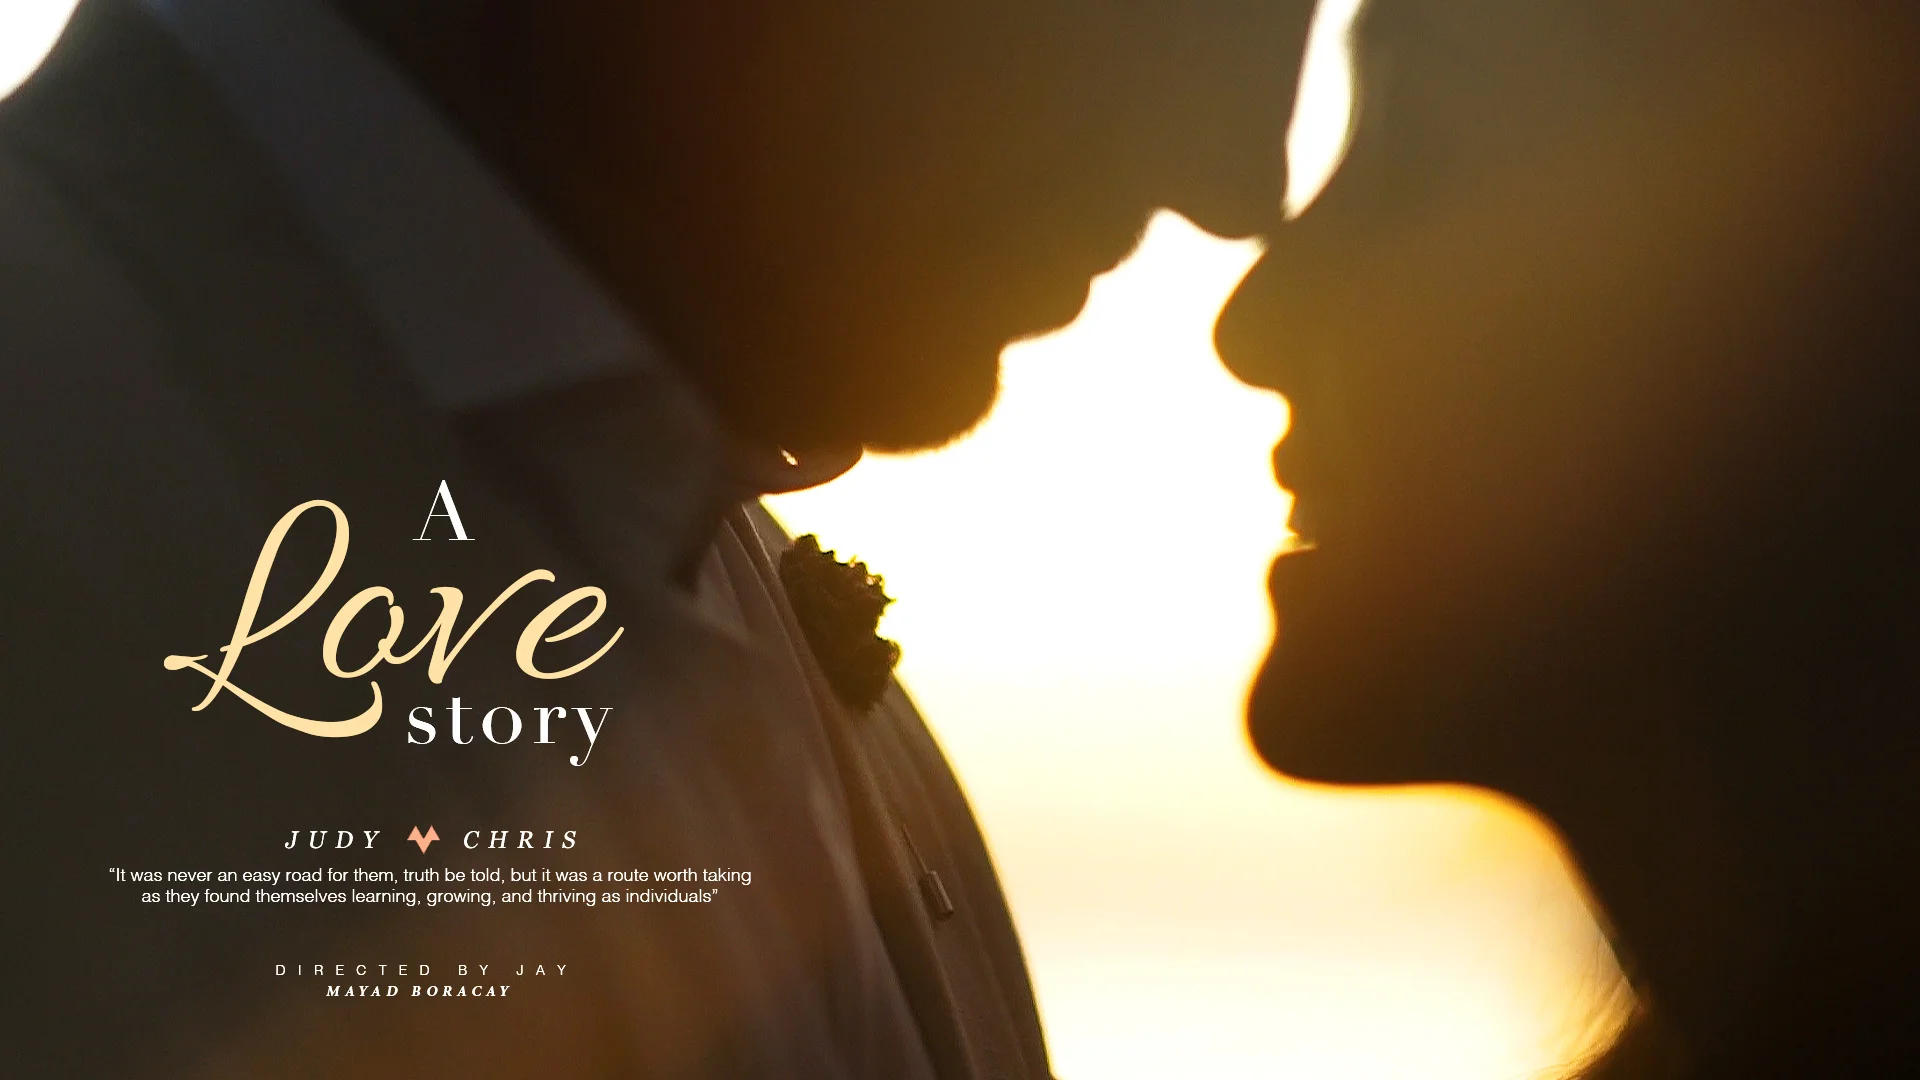 Mayad Boracay Wedding of Angela and Nathan captured. The greatest love story never told